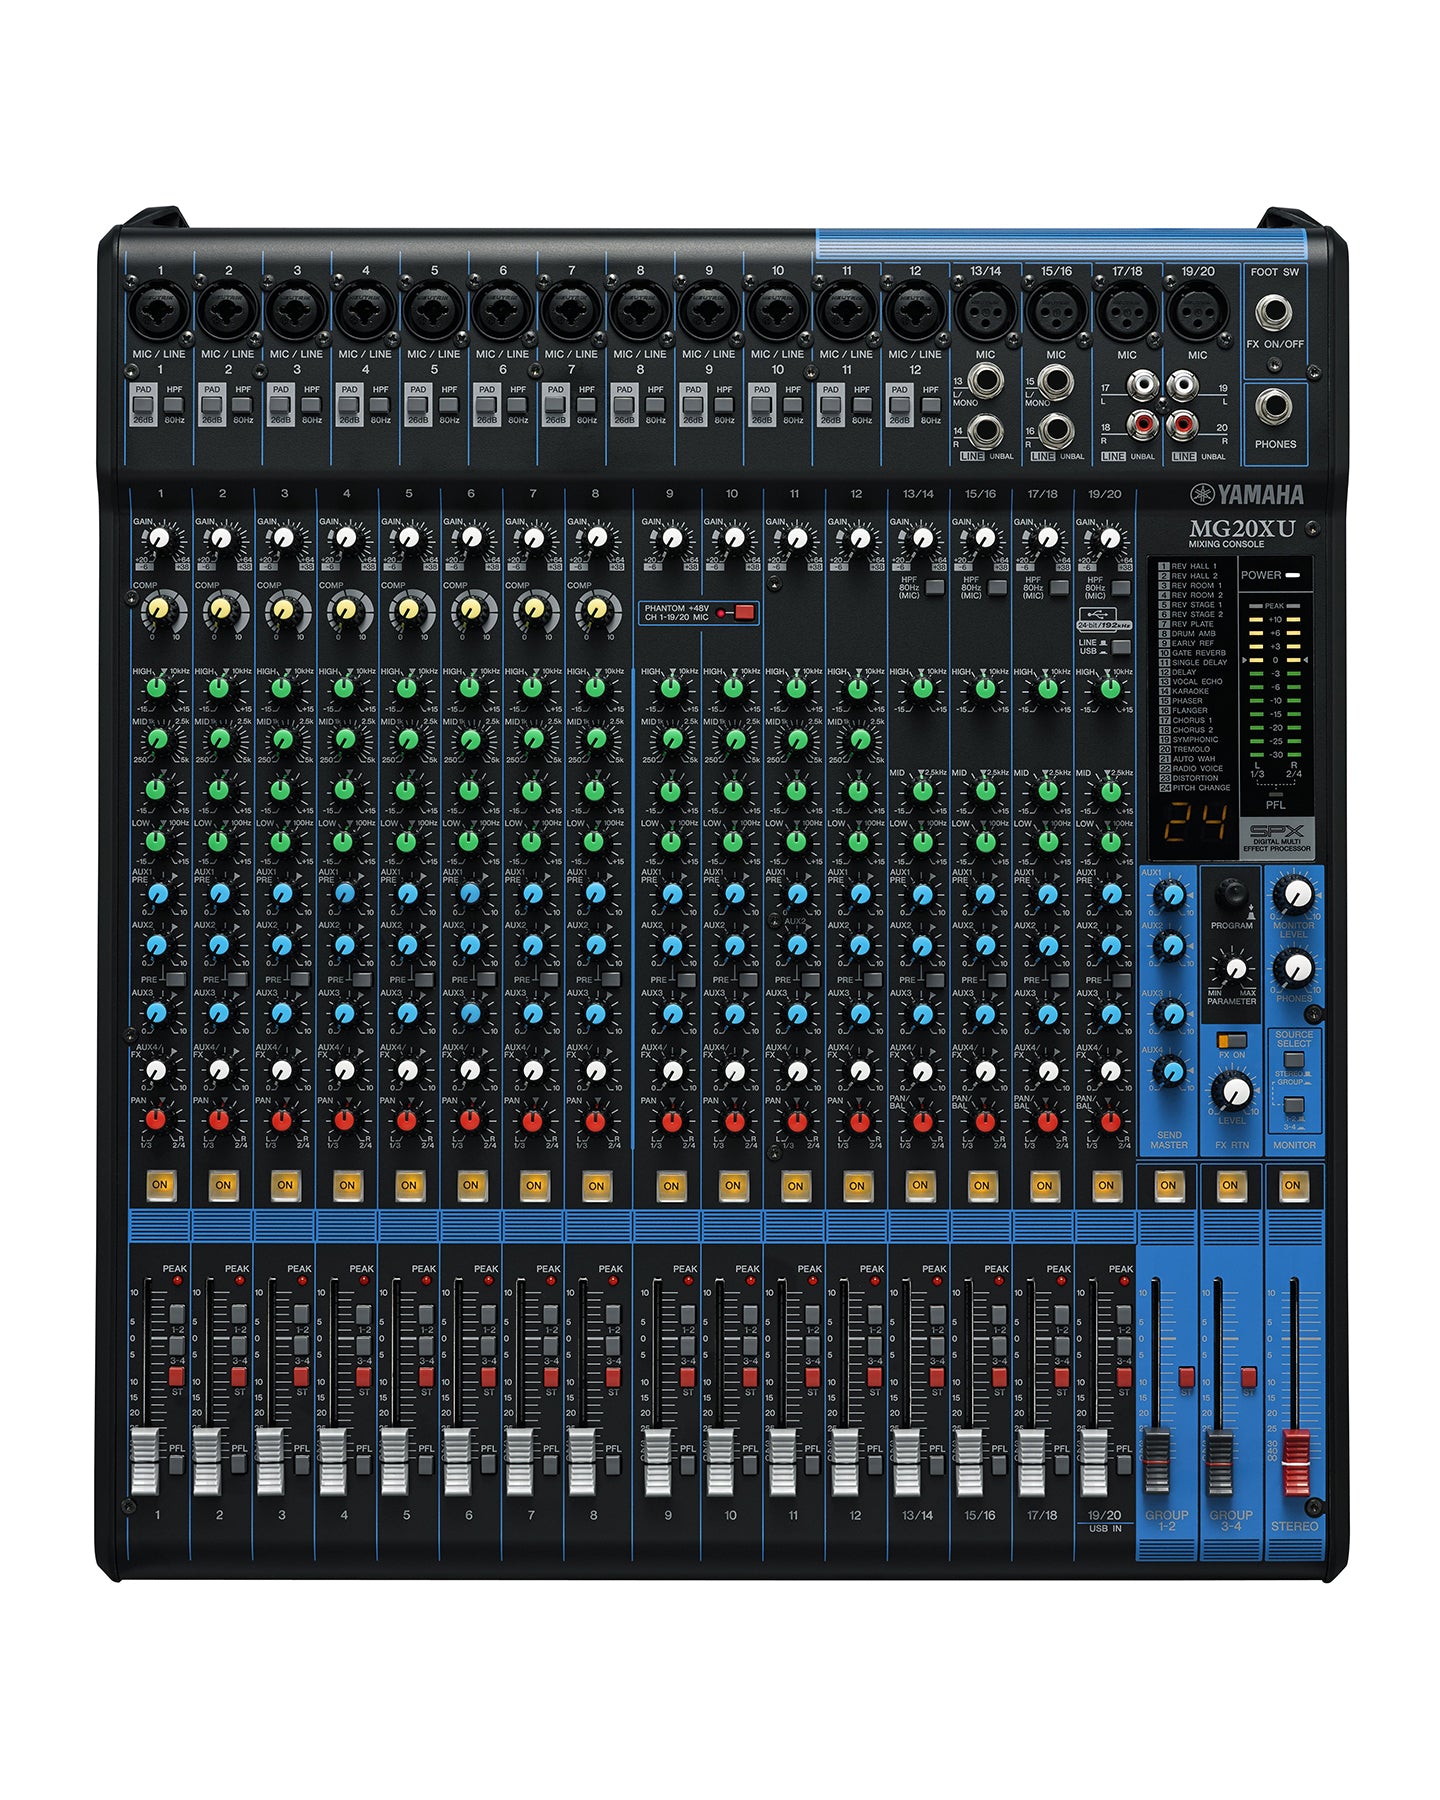 MG20XU 20-Input, 6-Bus Mixer, Single Knob Compression, 24 SPX Effect Rack-Kit included